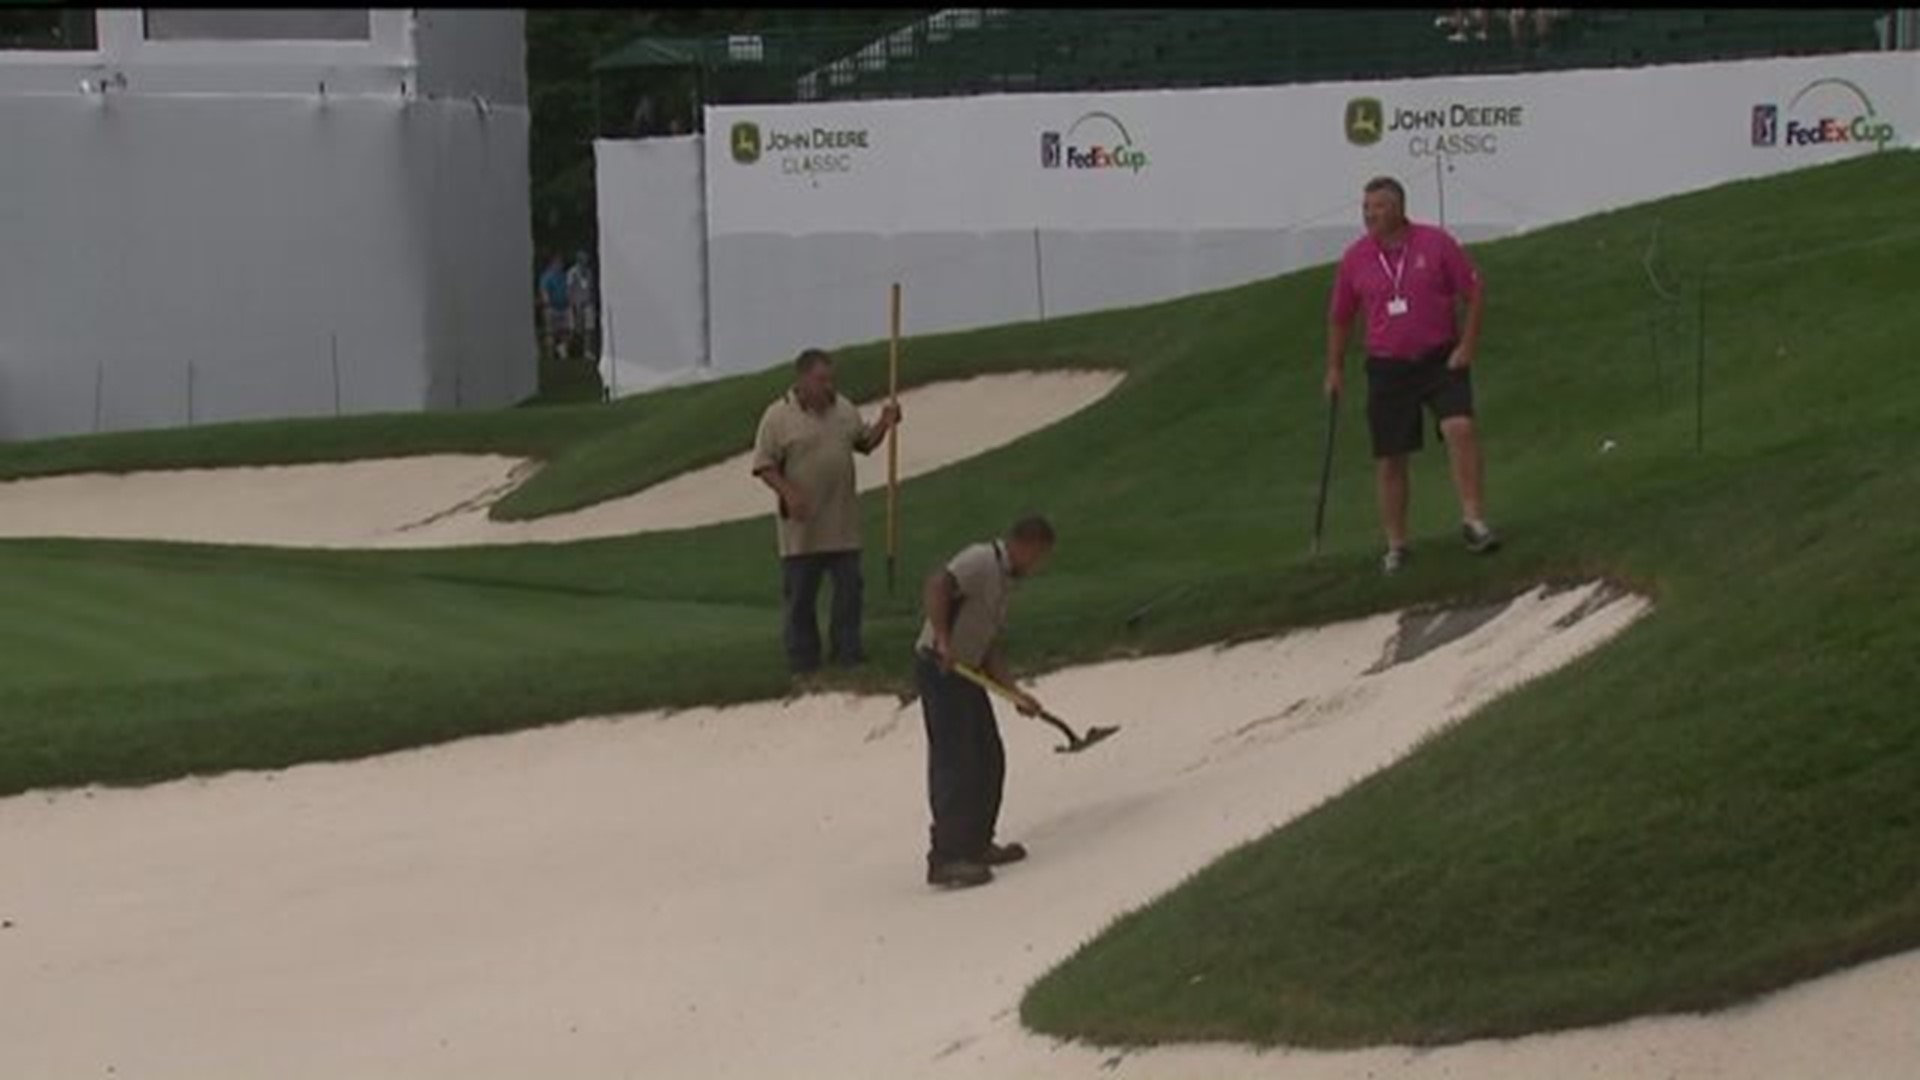 JDC crews clean up quickly after 1st Rnd Rain Delay